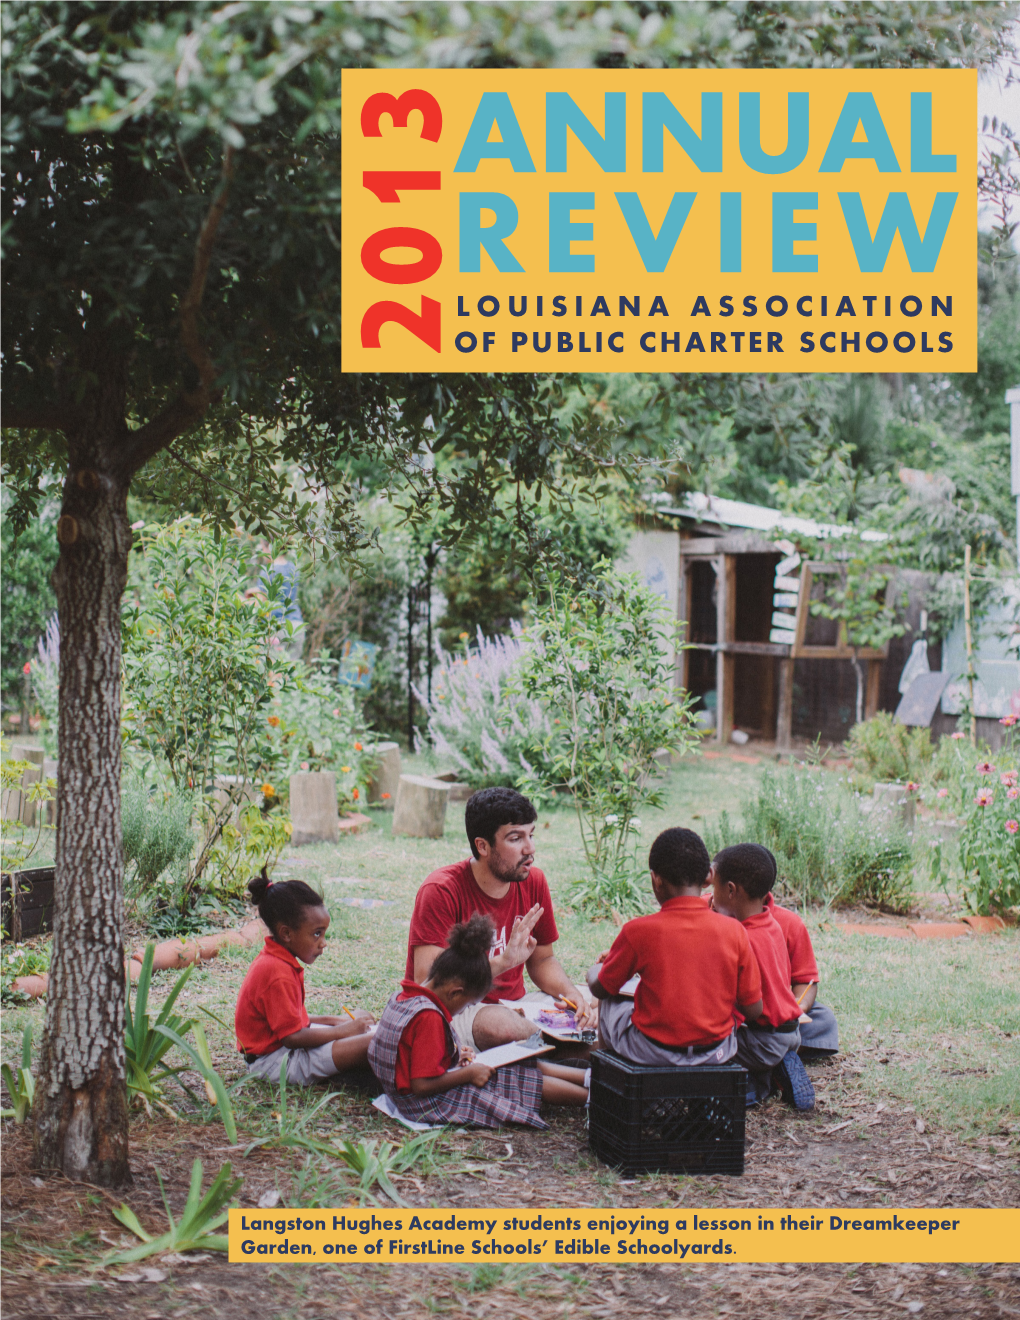 Annual Review Louisiana Association of Public Charter Schools 2013